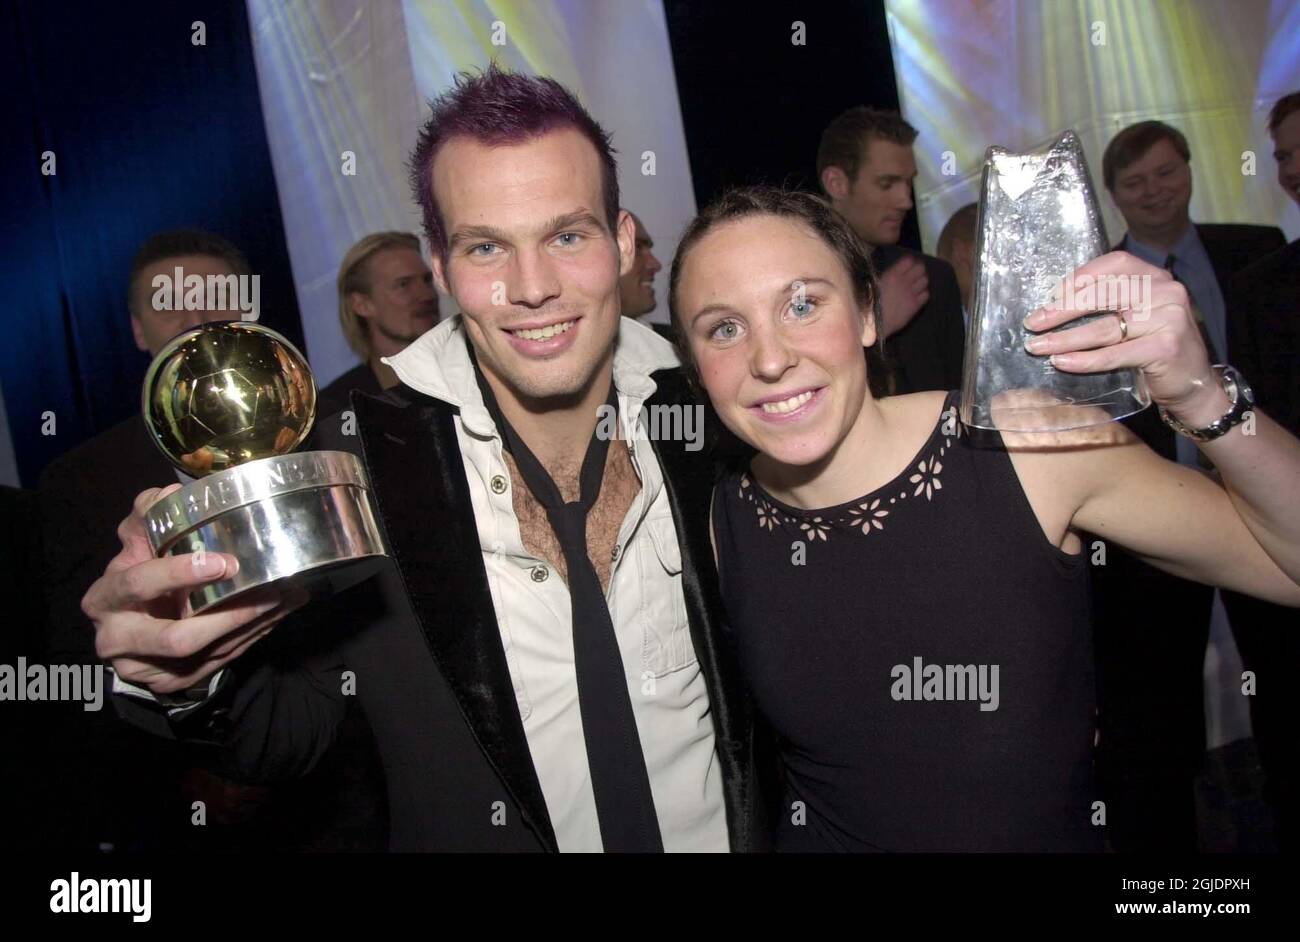 Arsenal's and Sweden's Fredrik Ljungberg (l) received two awards 'The Ball Of Gold' (pictured) and the award for 'Best Midfielder'. Hanna Ljungberg [No relation] (r) of Umea IF got the most prestigous award for women,'The Diamondball'.  Stock Photo